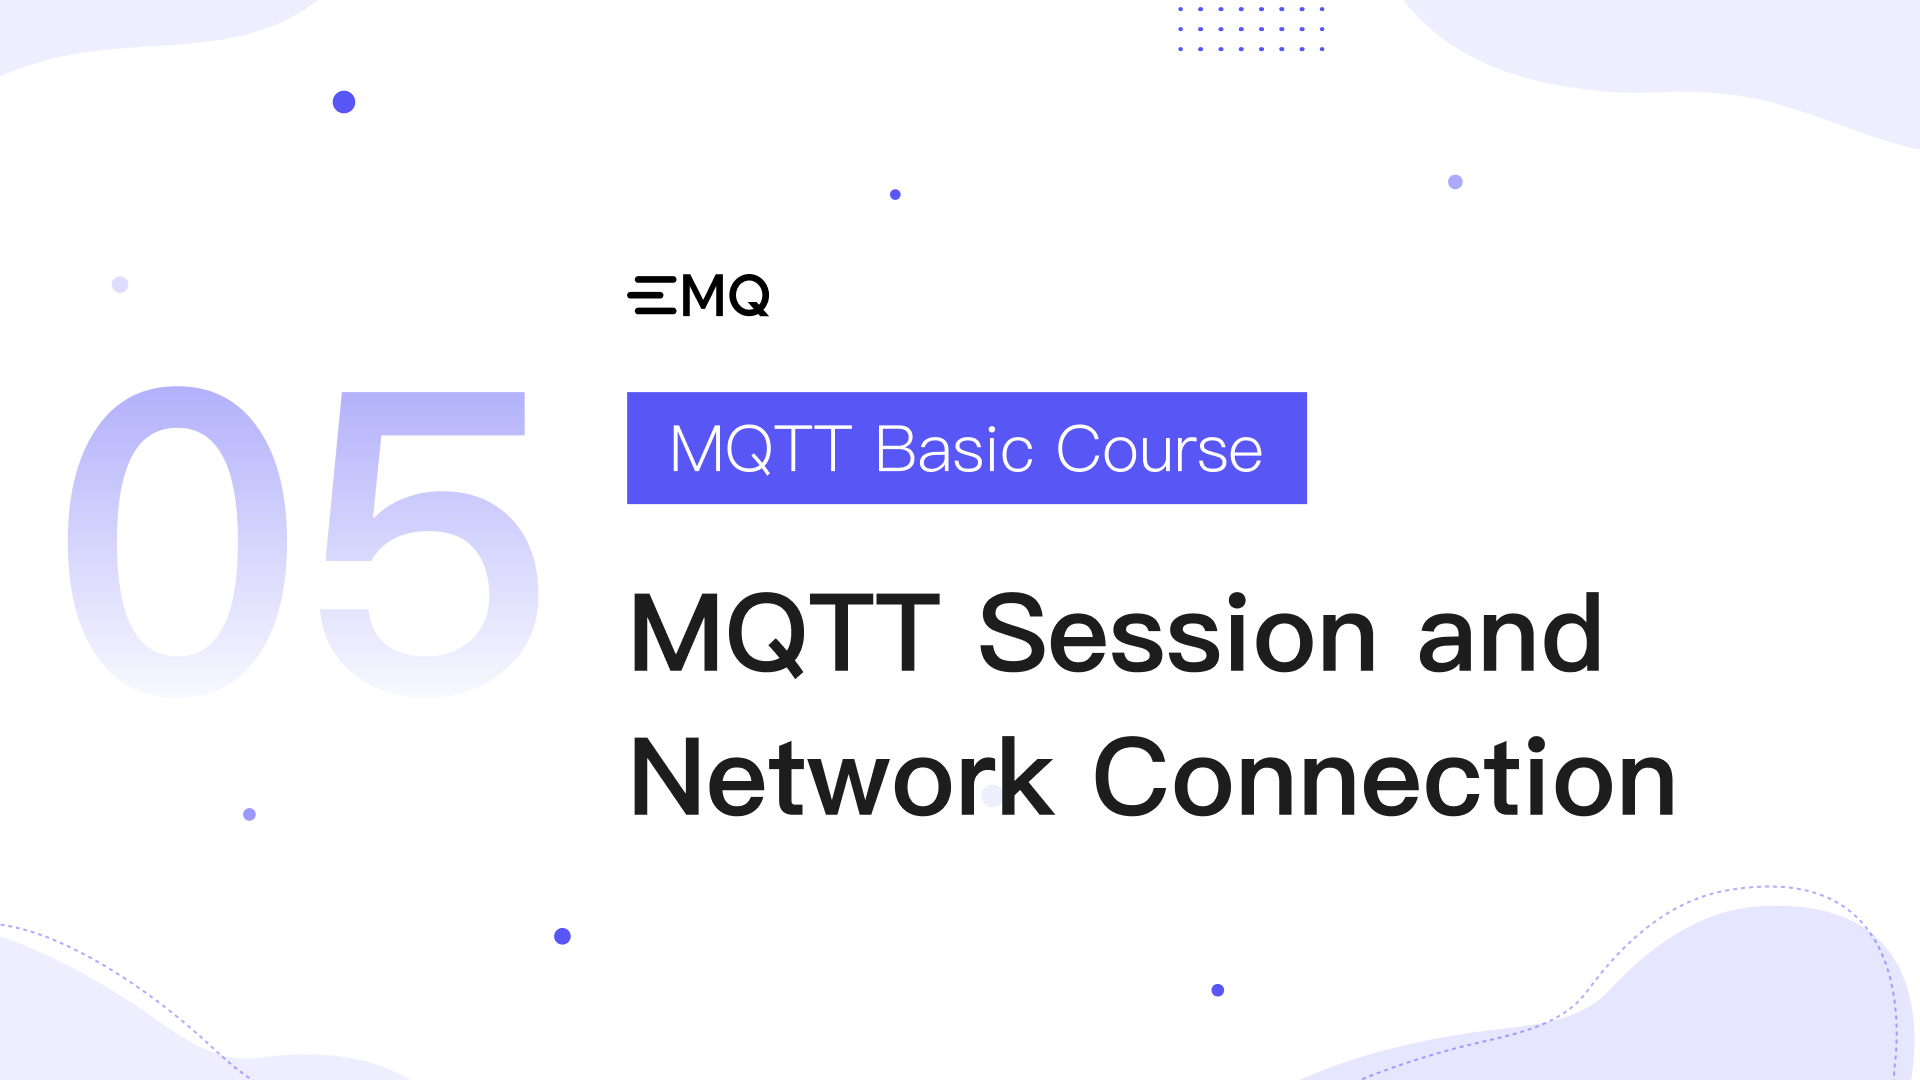 Lesson 5: MQTT Session and Network Connection - MQTT Basic Course